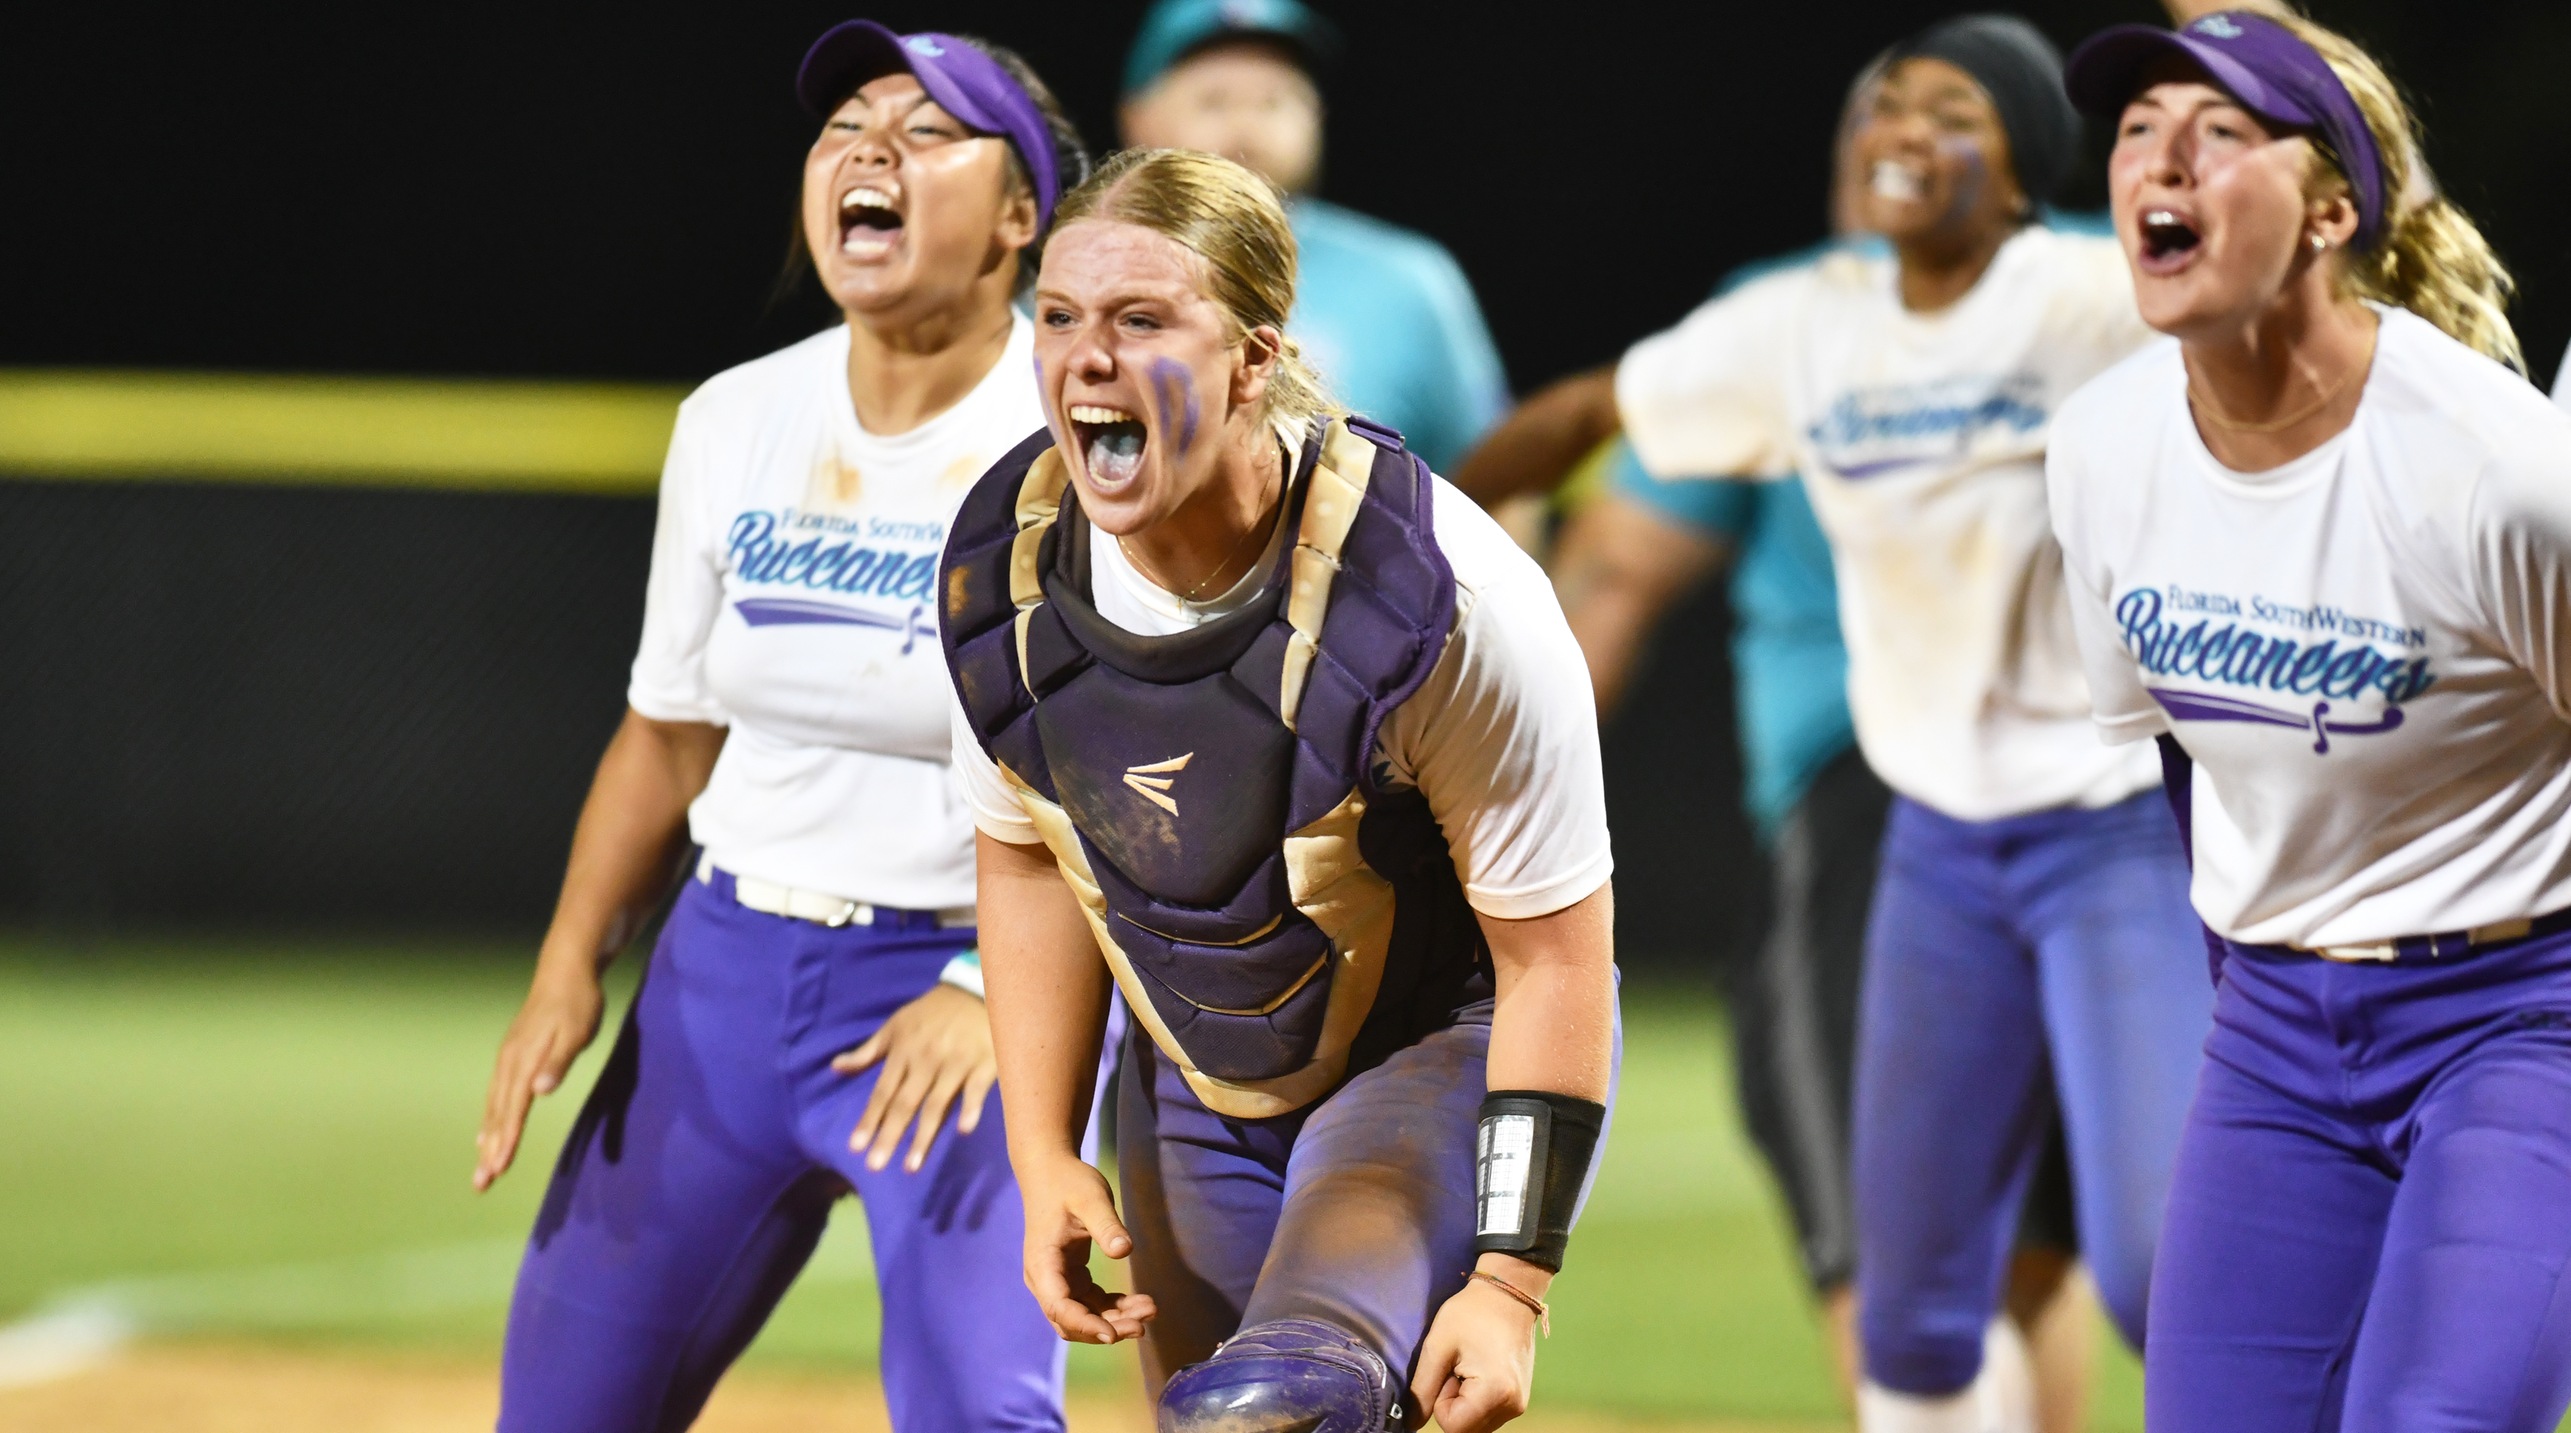 Sietske Drijvers celebrates the Bucs taking the lead late against Seminole State in their NJCAA World Series win (Photo by Roy Allen)